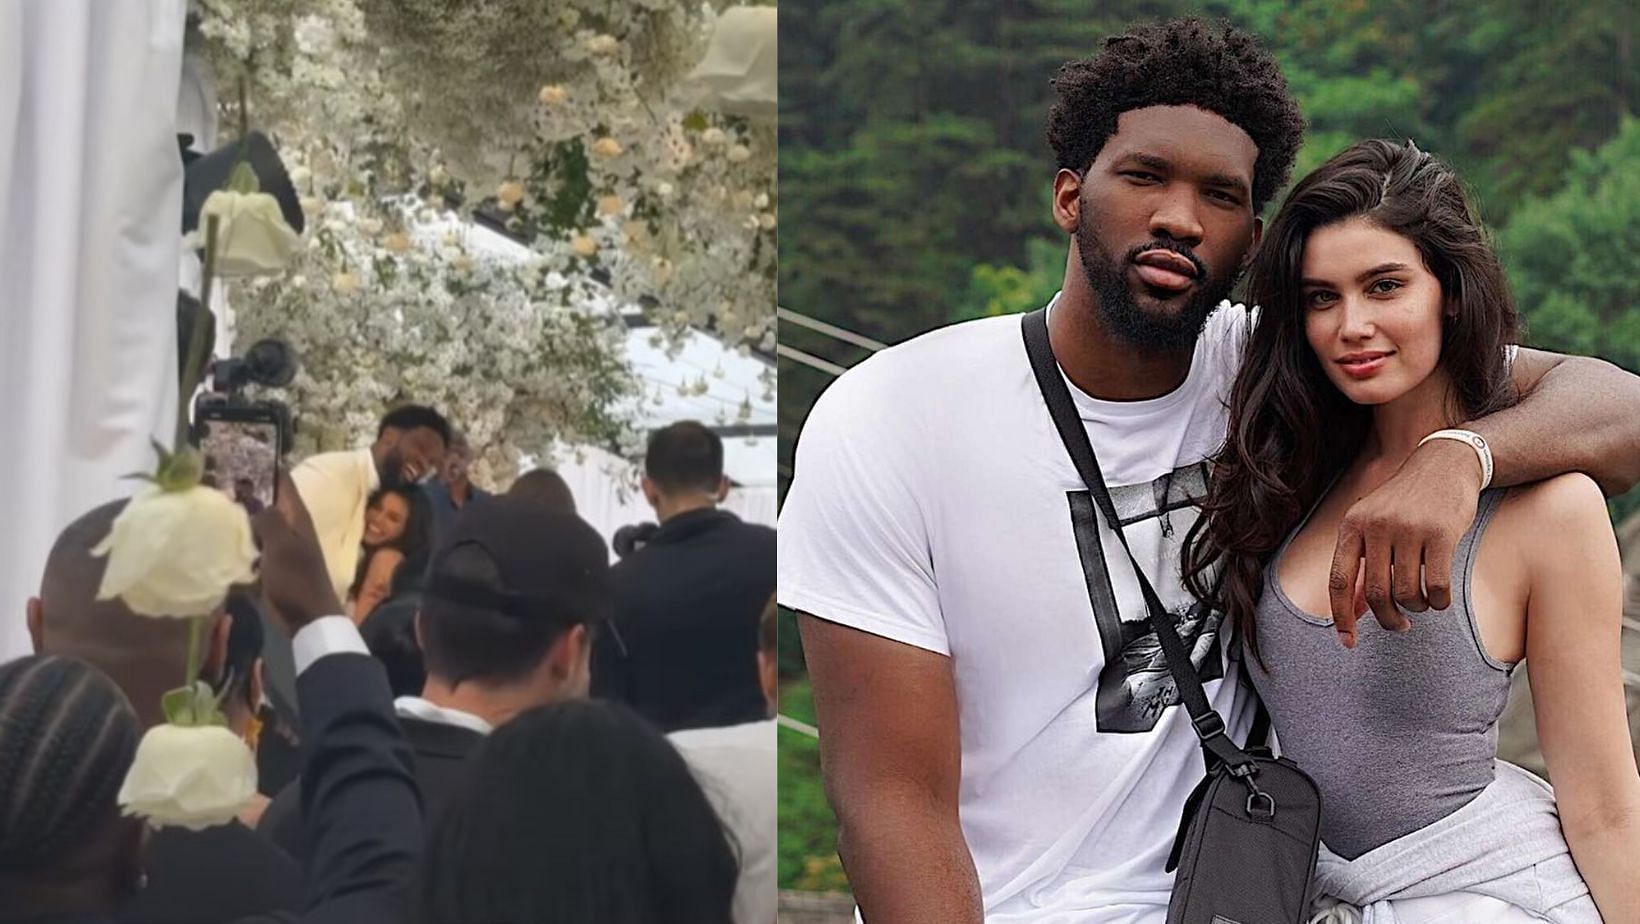 Watch: Newlyweds Joel Embiid and Anne De Paula dance to “Back at One”,  performed by the legendary Brian McKnight